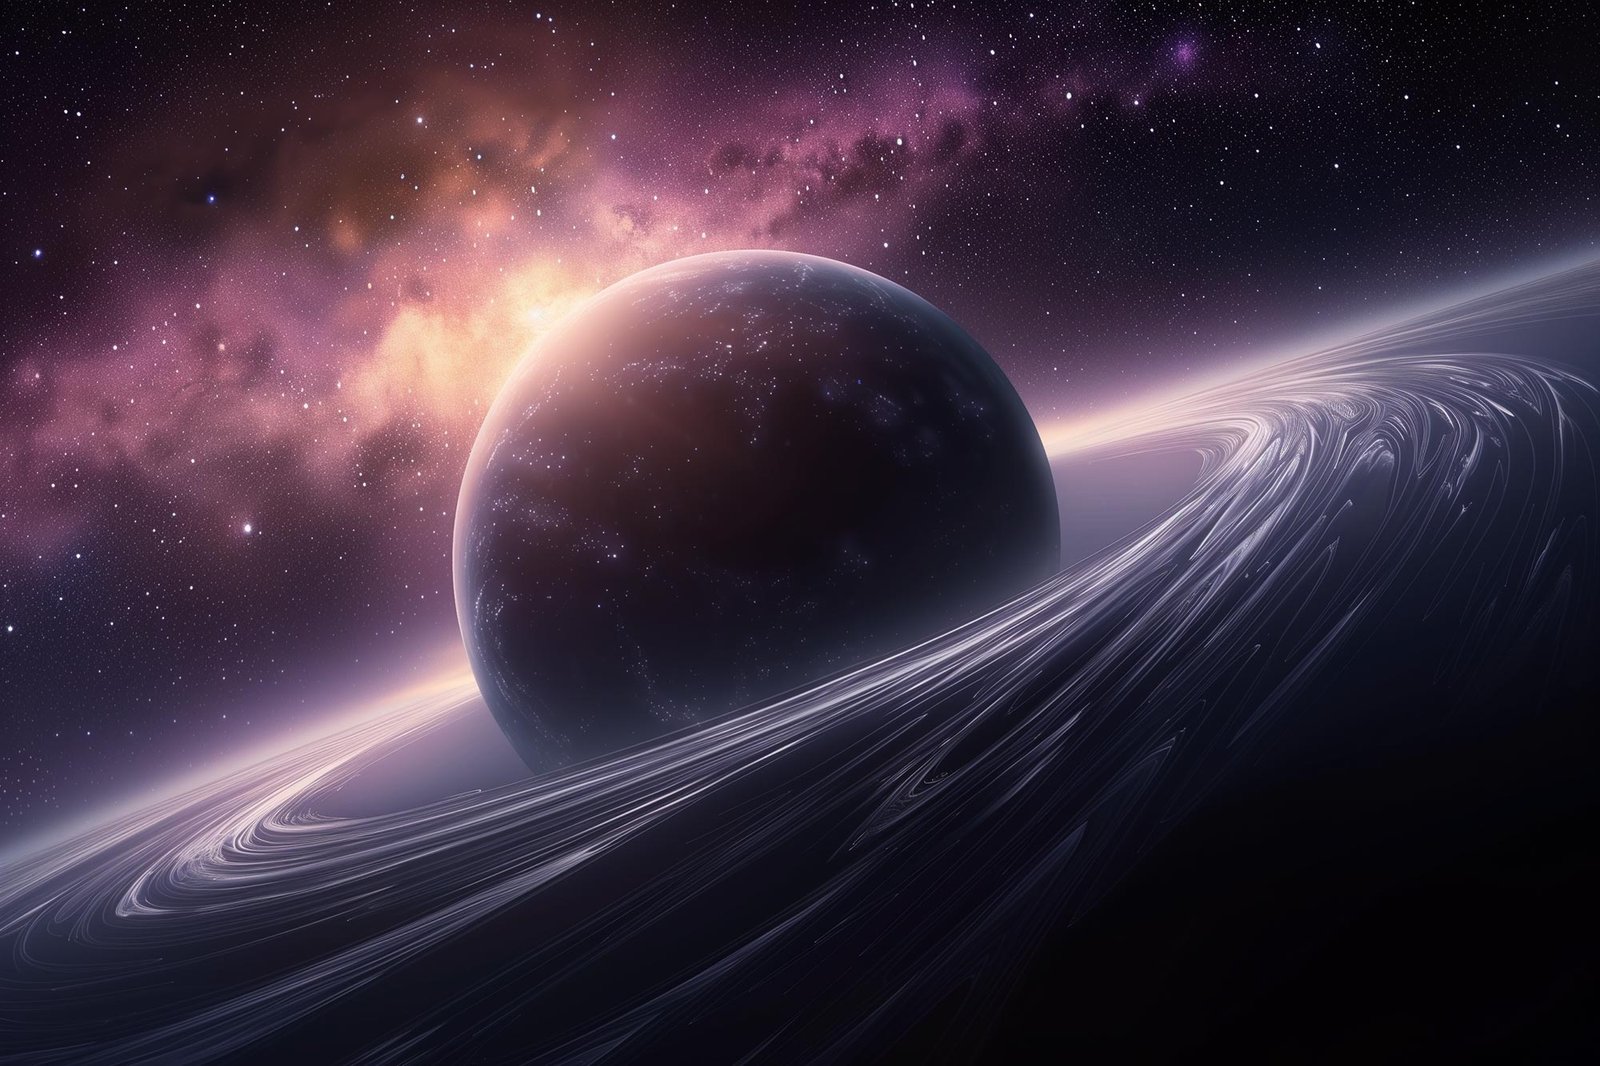 Unraveling the Hydrodynamic Mysteries of Exoplanets